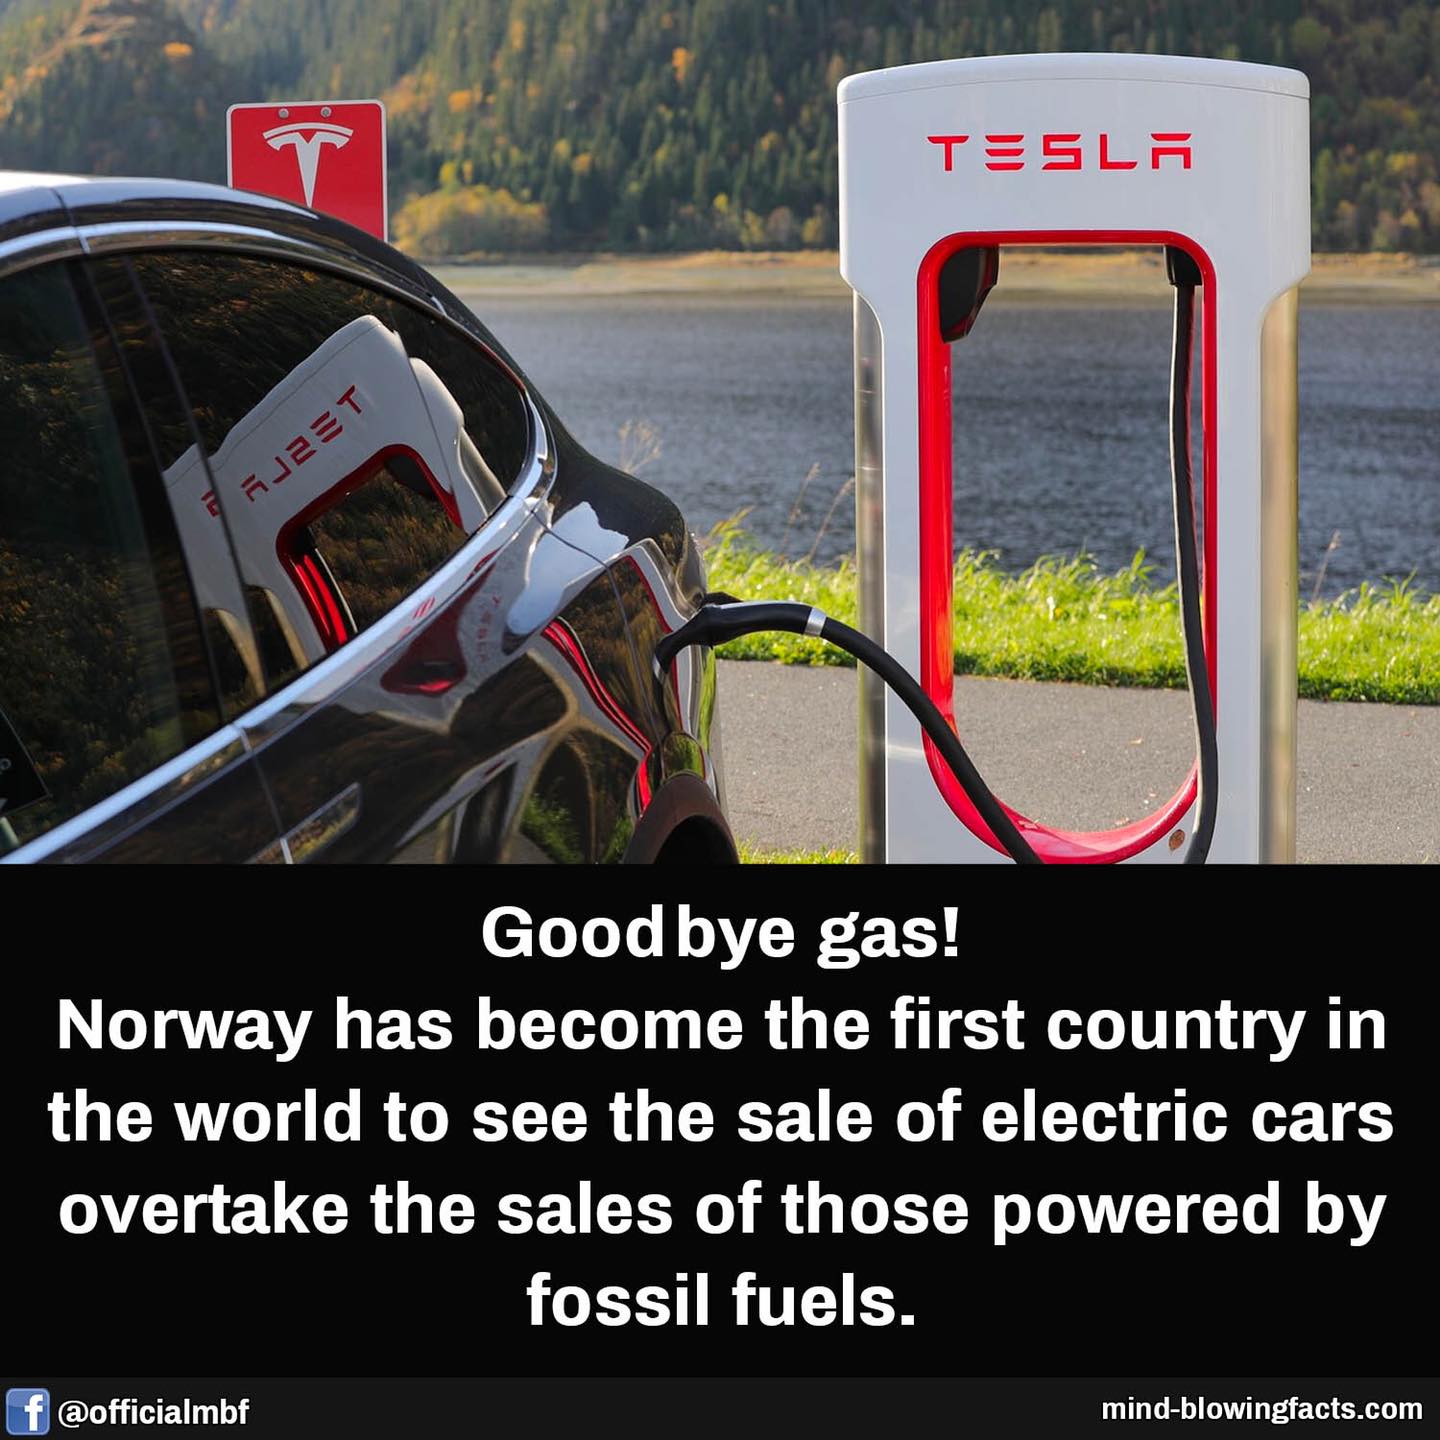 od {
Goodbye gas!
Norway has become the first country in
the world to see the sale of electric cars
overtake the sales of those powered by
fossil fuels.

@officialmbf mind-blowingfacts.com